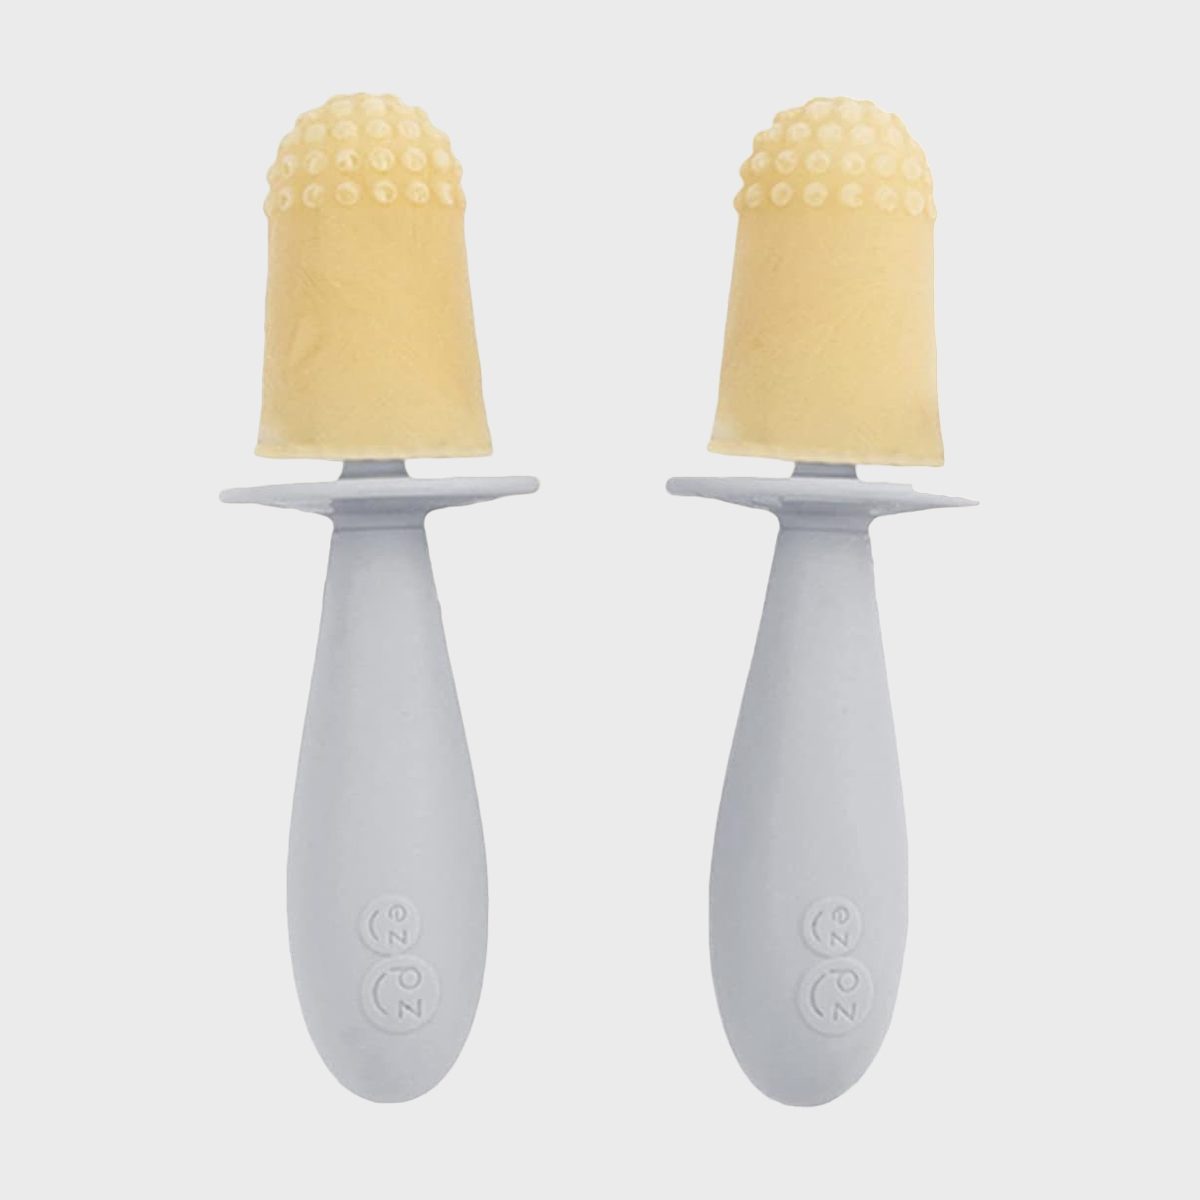 <p>There are tons of teething products on the market, but these <a href="https://www.amazon.com/ezpz-Tiny-Pops-2-Pack-Dishwasher/dp/B0BMW86V92" rel="noopener noreferrer">infant popsicle molds</a> are a godsend for parents and babies once teething begins. Each mold holds a half ounce of breast milk or formula and has a short, fat, round handle that's just the right size for a baby's little hands. <a href="https://www.rd.com/list/foods-invented-by-accident/">Popsicles</a> (or milksicles as we call them in our house) are easy to make, and the silicone sleeves make them, well, easy peasy to remove.</p> <p class="listicle-page__cta-button-shop"><a class="shop-btn" href="https://www.amazon.com/ezpz-Tiny-Pops-2-Pack-Dishwasher/dp/B0BMW86V92">Shop Now</a></p>